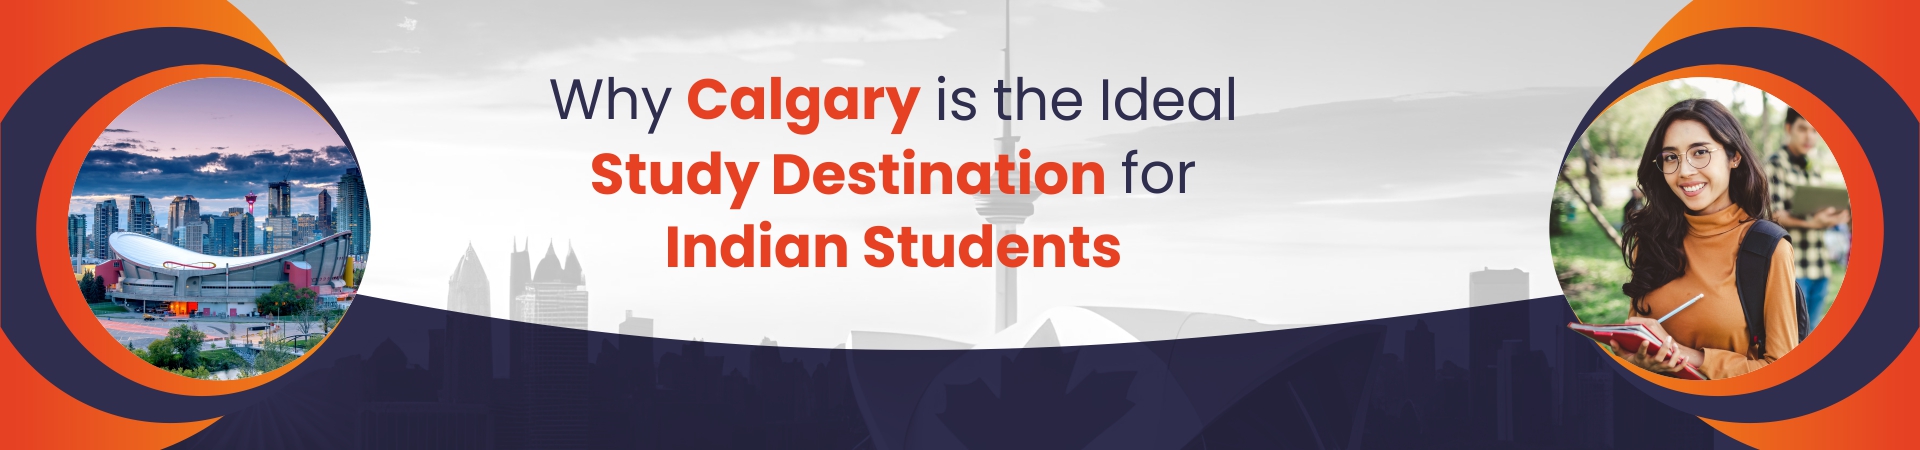 Why Calgary is the Ideal Study Destination for Indian Students 